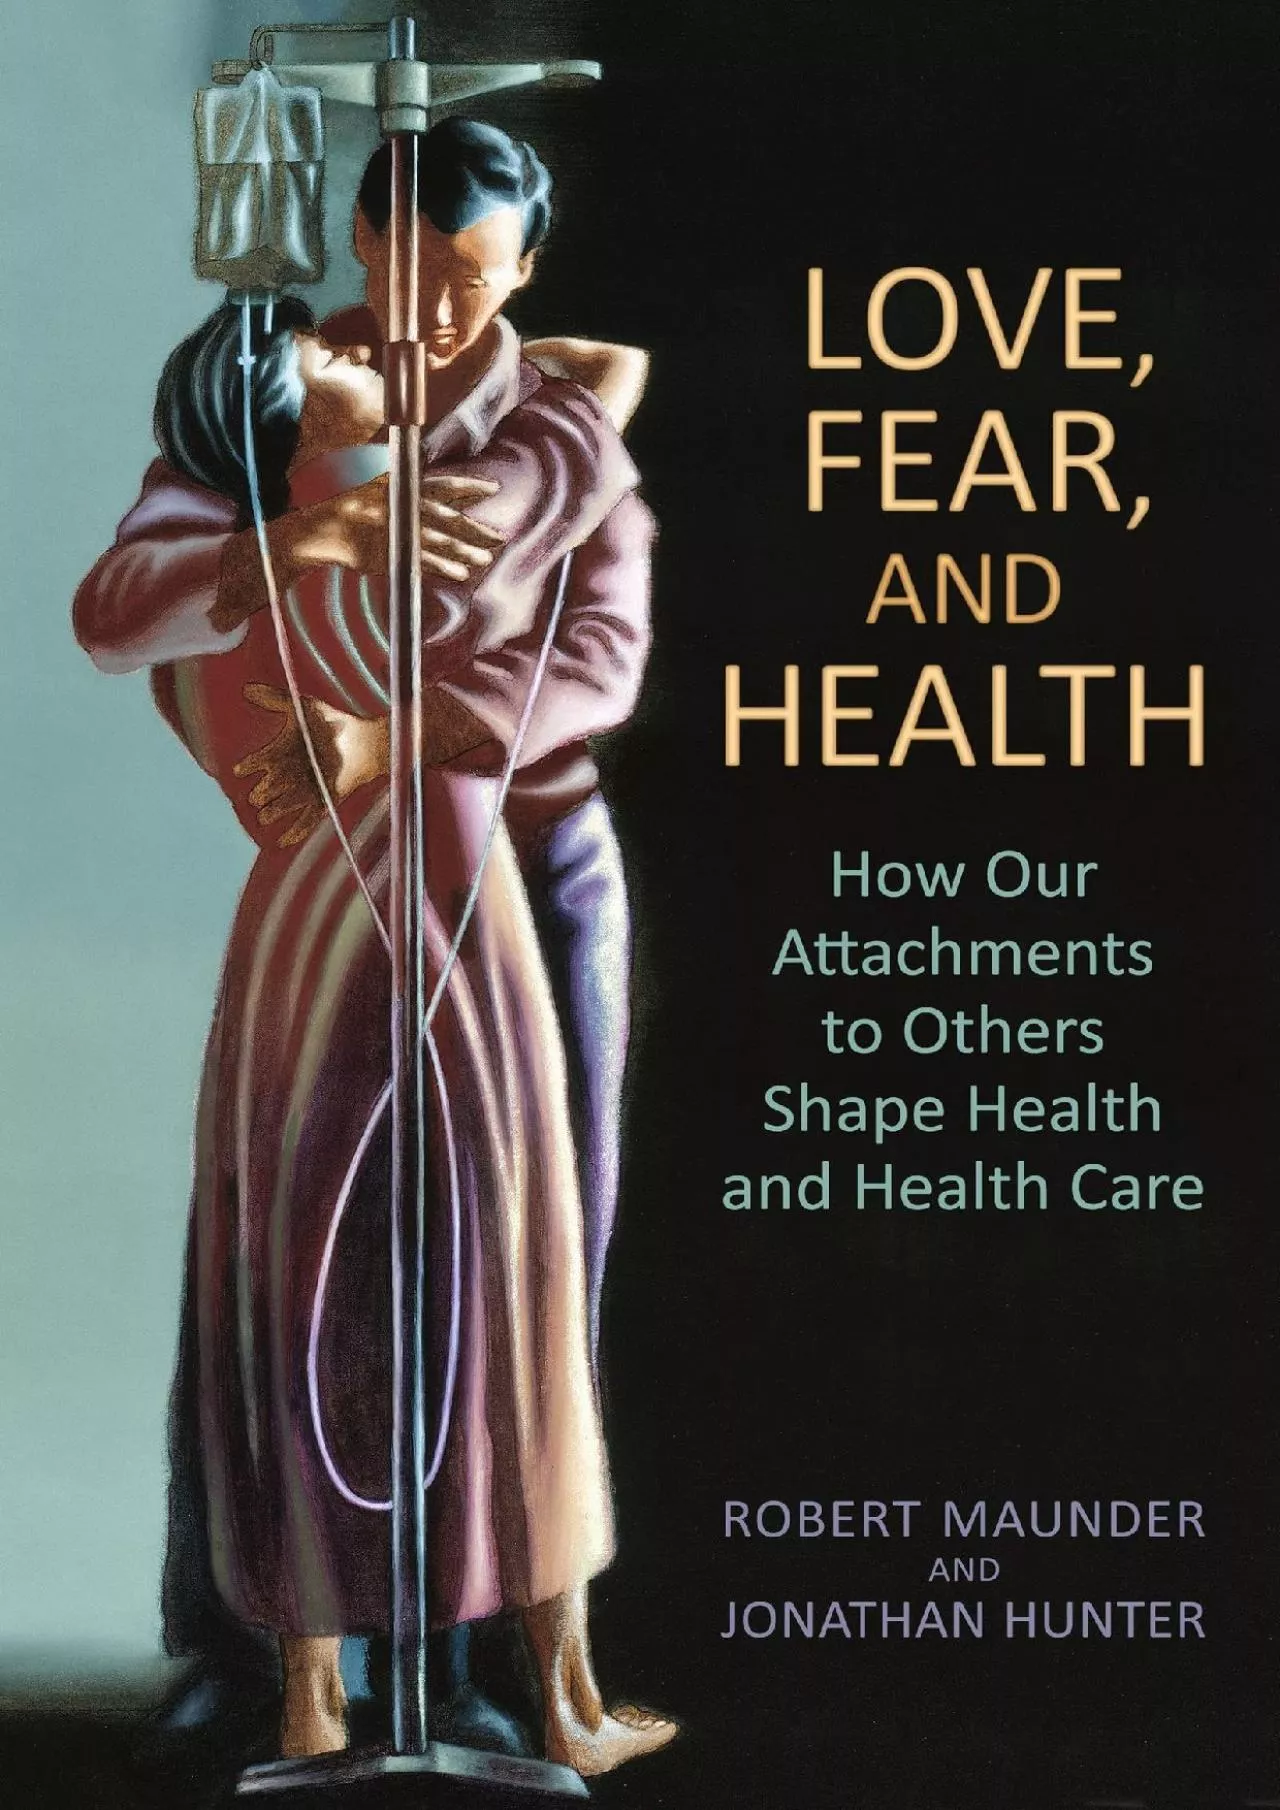 (EBOOK)-Love, Fear, and Health: How Our Attachments to Others Shape Health and Health